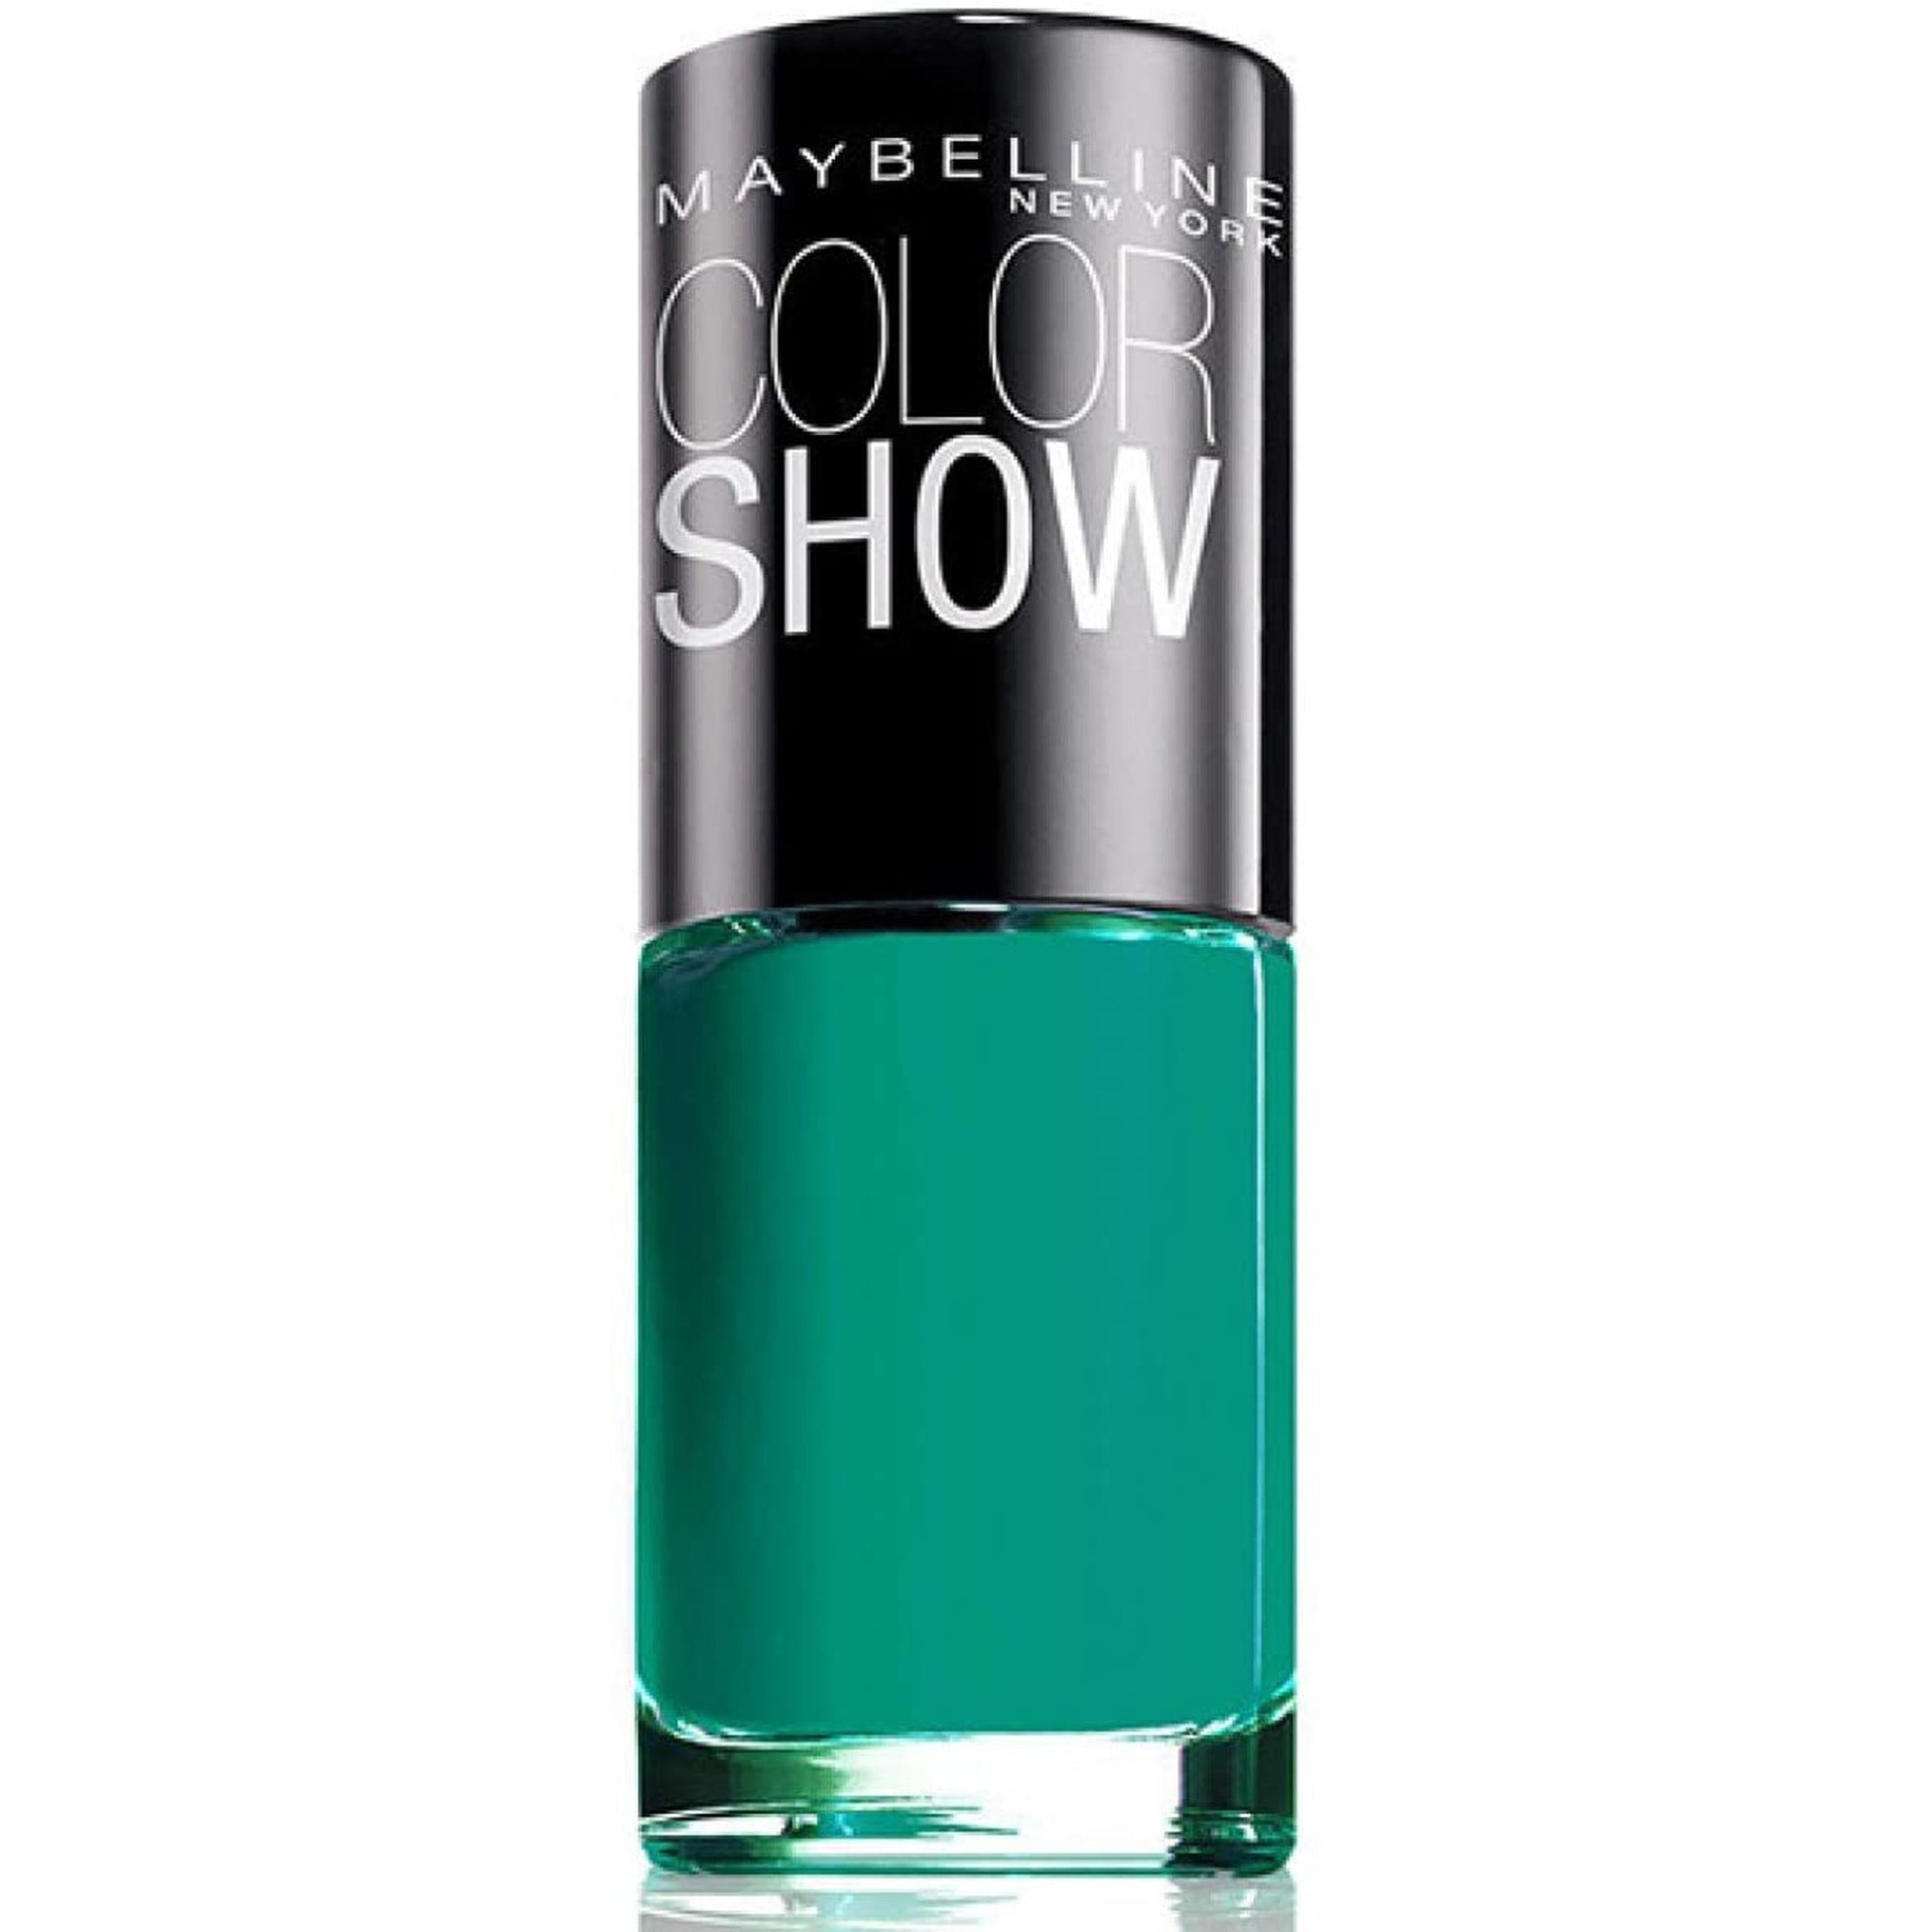 Maybelline Color Show Nail Polish - 120 Urban Turquoise-Maybelline-BeautyNmakeup.co.uk